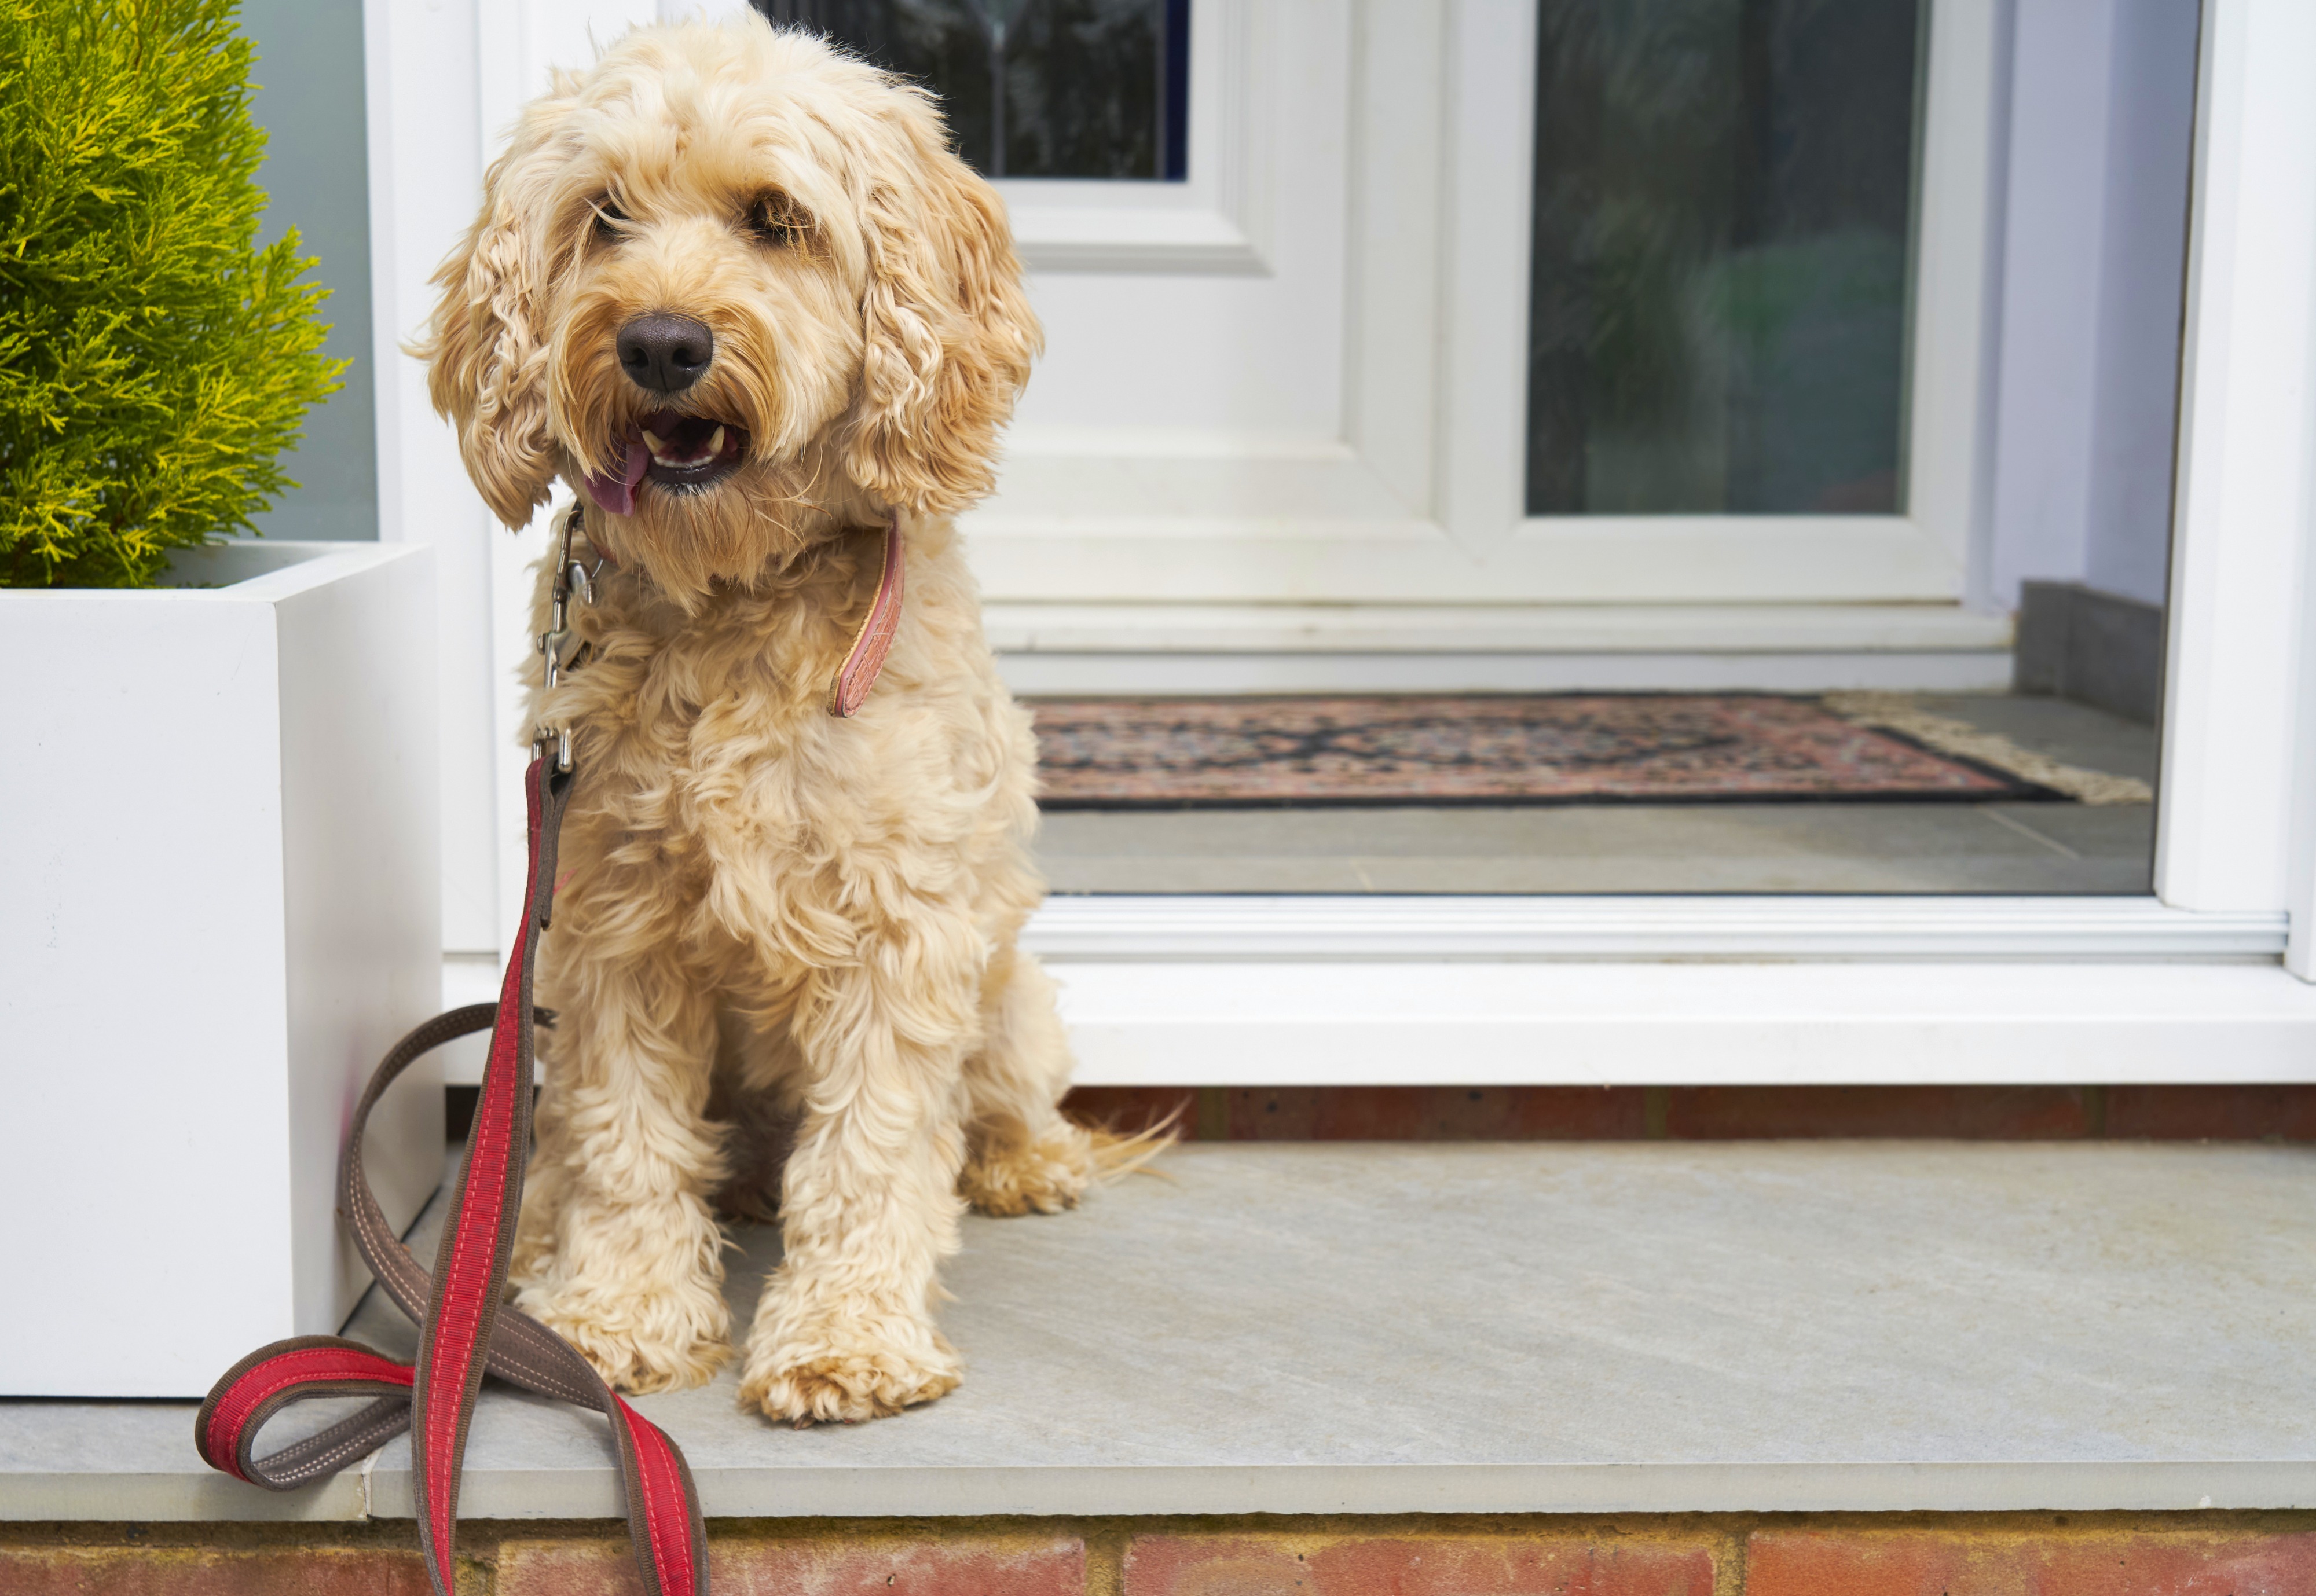 A light brown cockapoo sits on a front porch next to a white planter box with green shrub in it and has red leash hanging from collar.